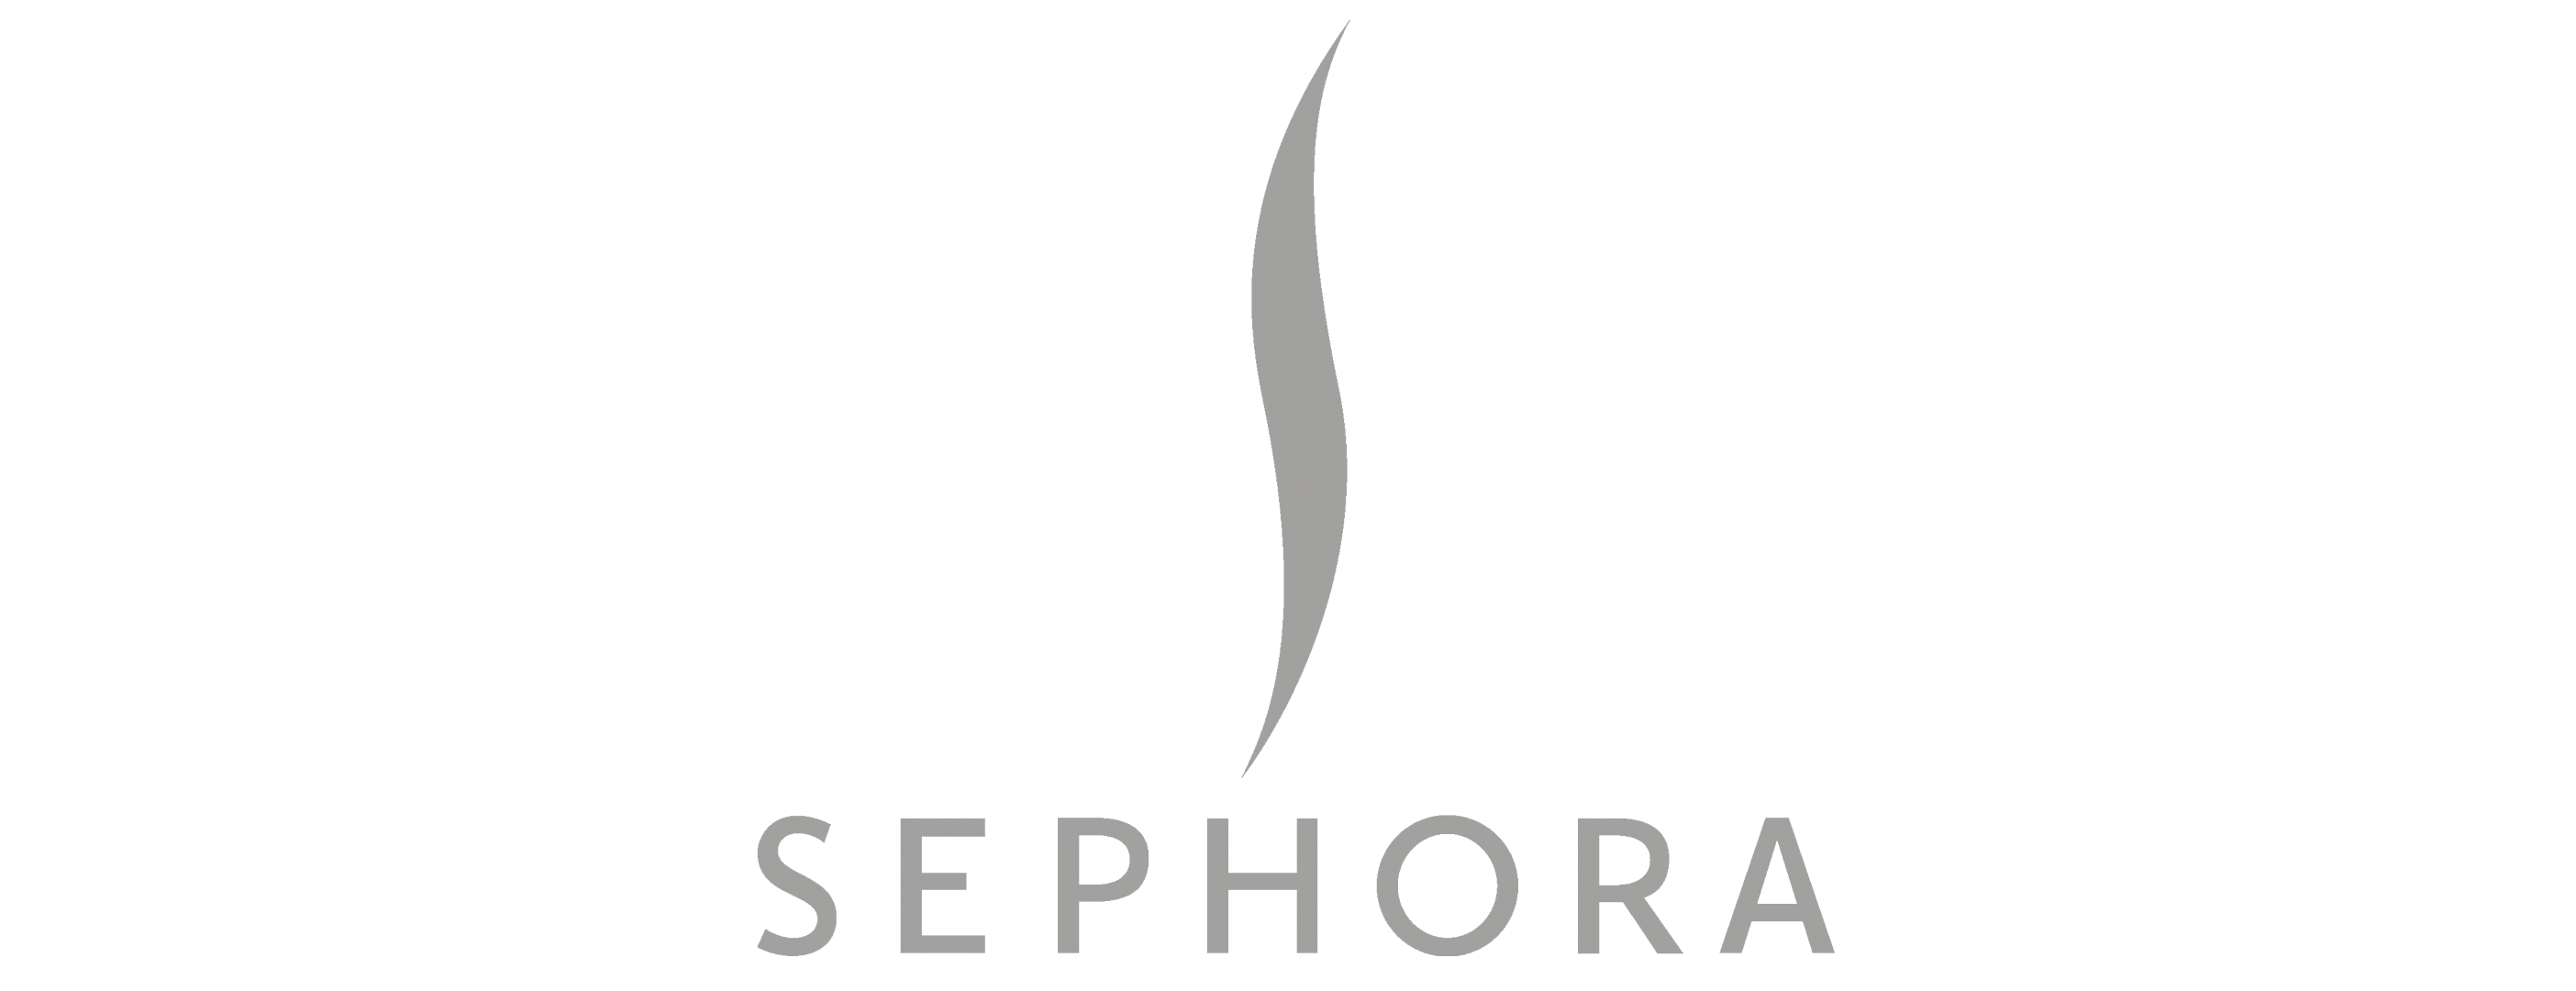 Sephora logo on a white background for corporate photography.